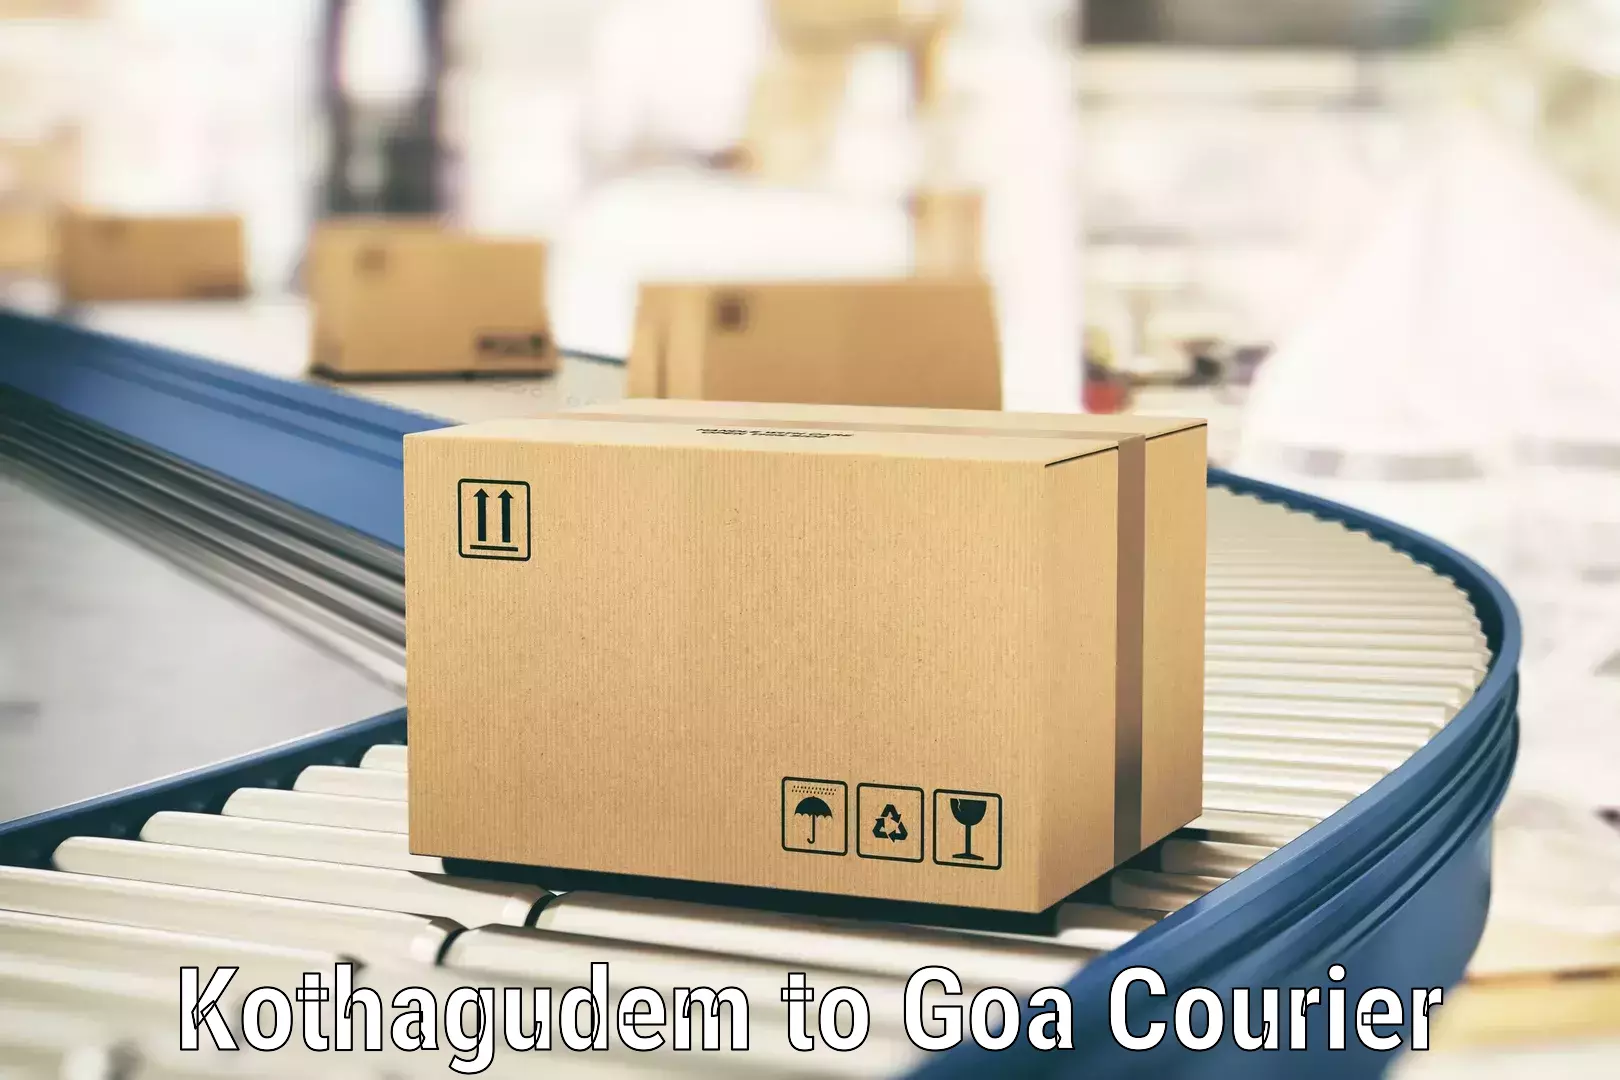 Round-the-clock parcel delivery Kothagudem to IIT Goa